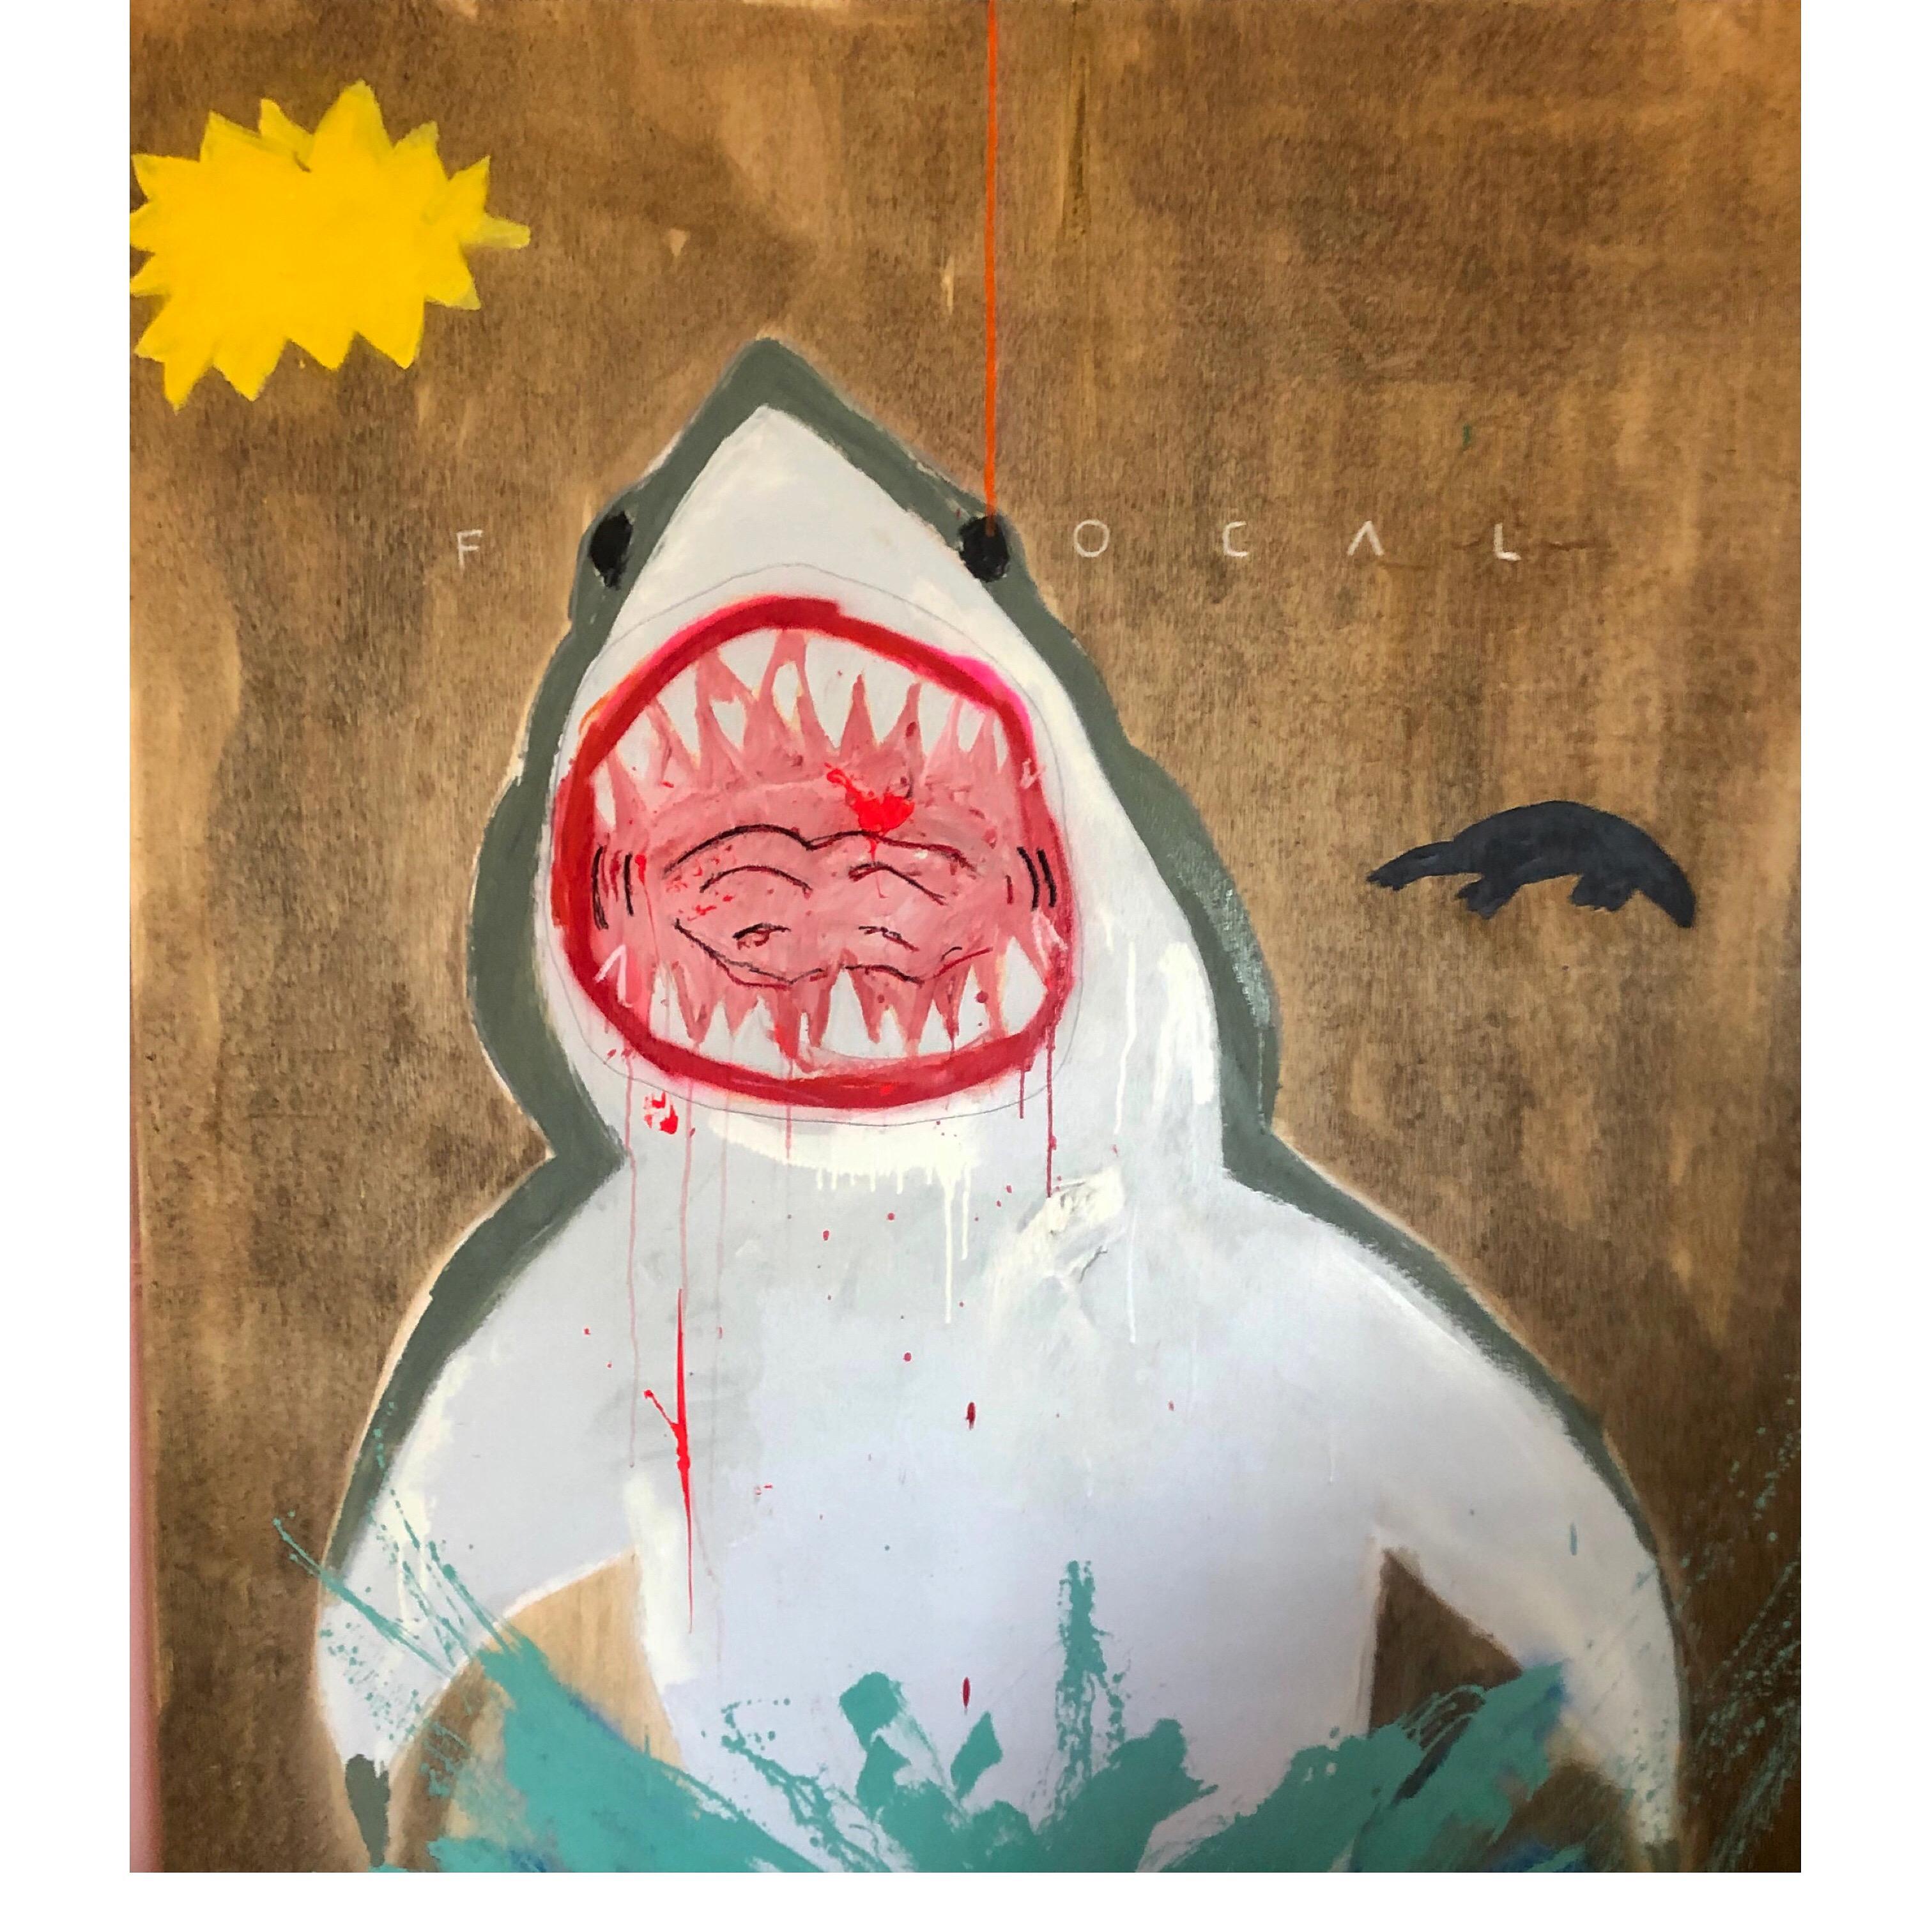 Breaching For The Stars, 2020, Mixed Media on Wood